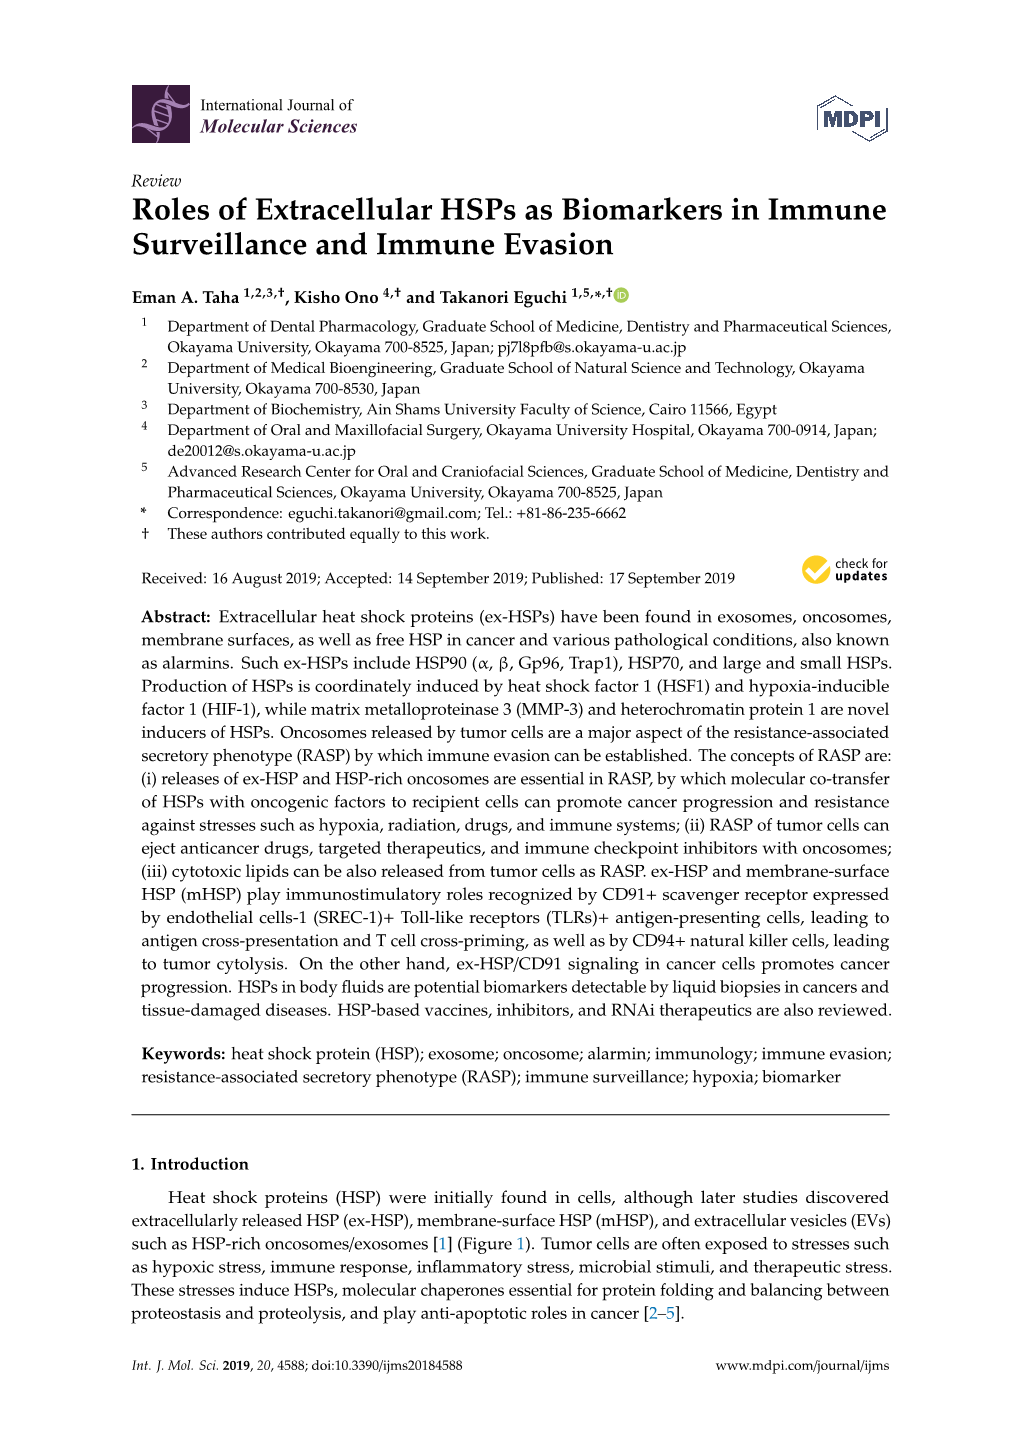 Roles of Extracellular Hsps As Biomarkers in Immune Surveillance and Immune Evasion